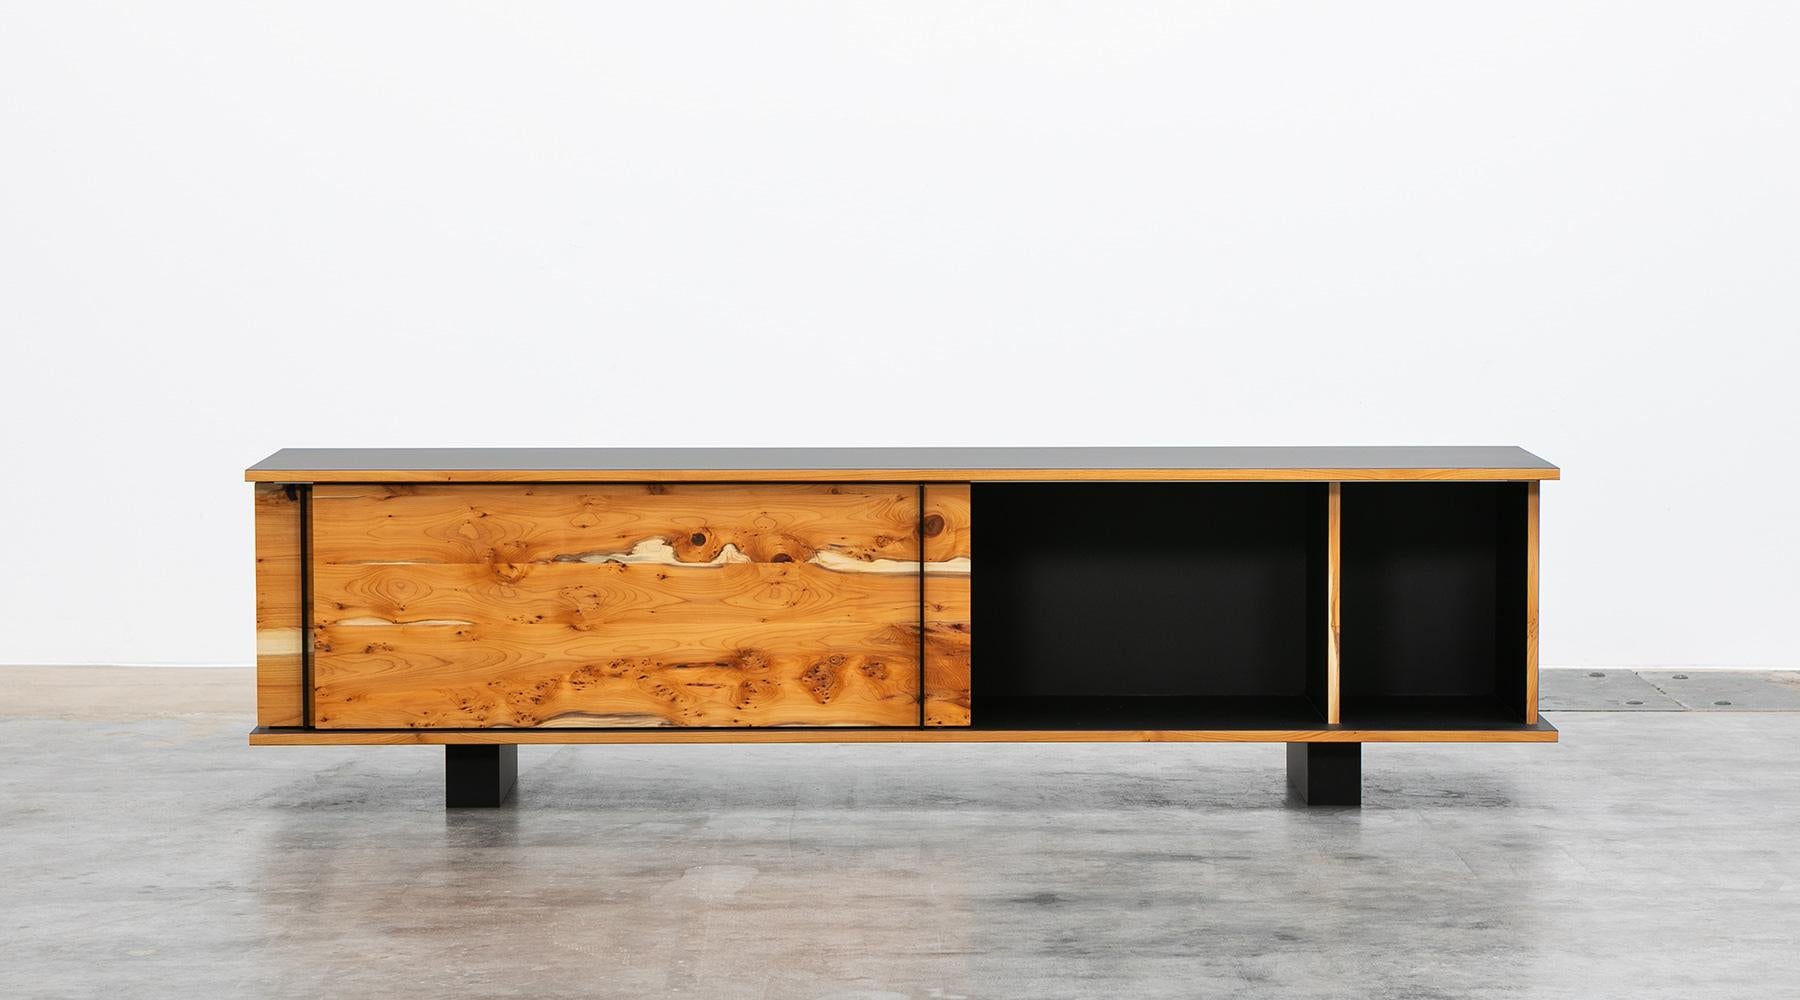 Sideboard by contemporary German artist Johannes Hock. The sliding doors of this unique piece are made of yew wood with ebony handles, the body is made of ultramatt black HPL, as well as the backside. Manufactured by Atelier Johannes Hock.